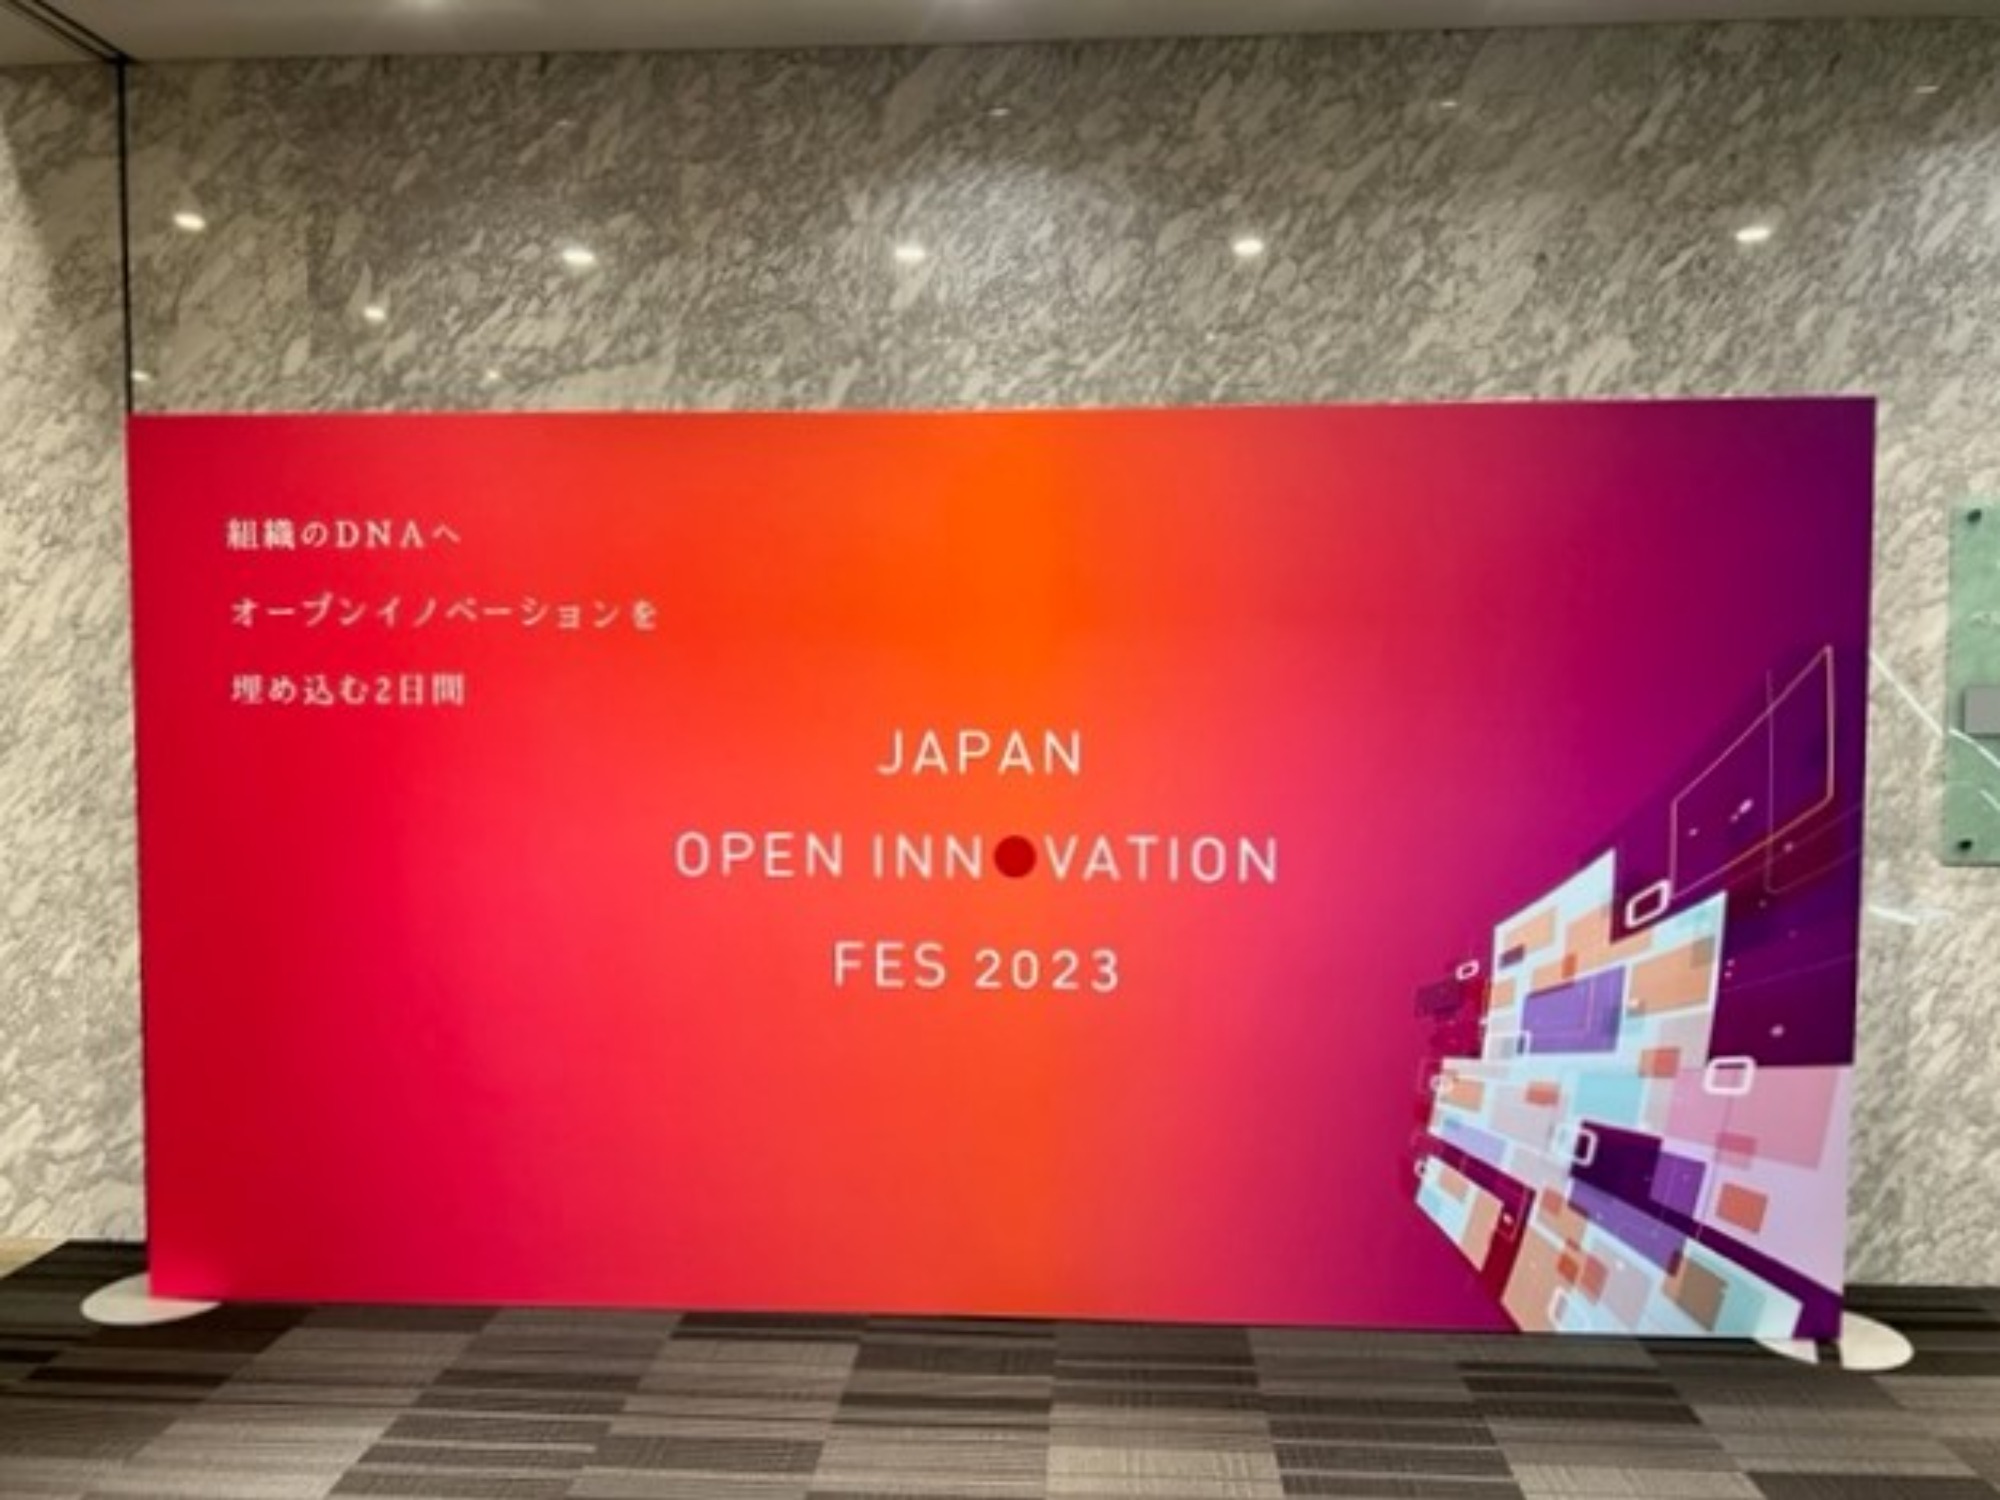  JAPAN OPEN INNOUATION FES 2023に出展してきました！！